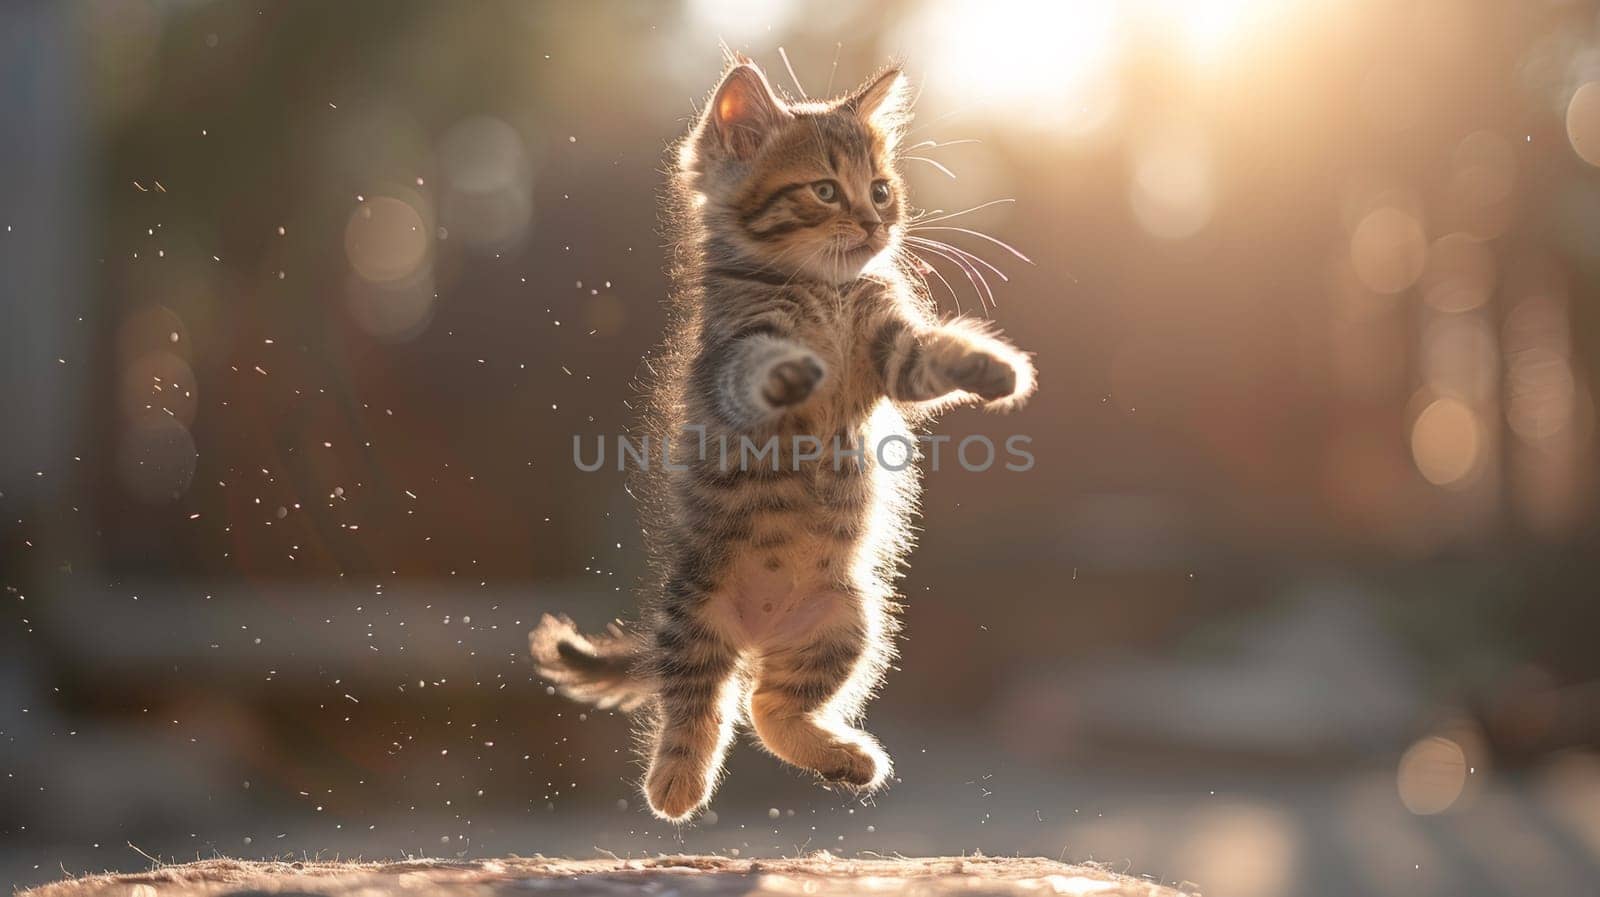 A kitten jumping up into the air while standing on a rock